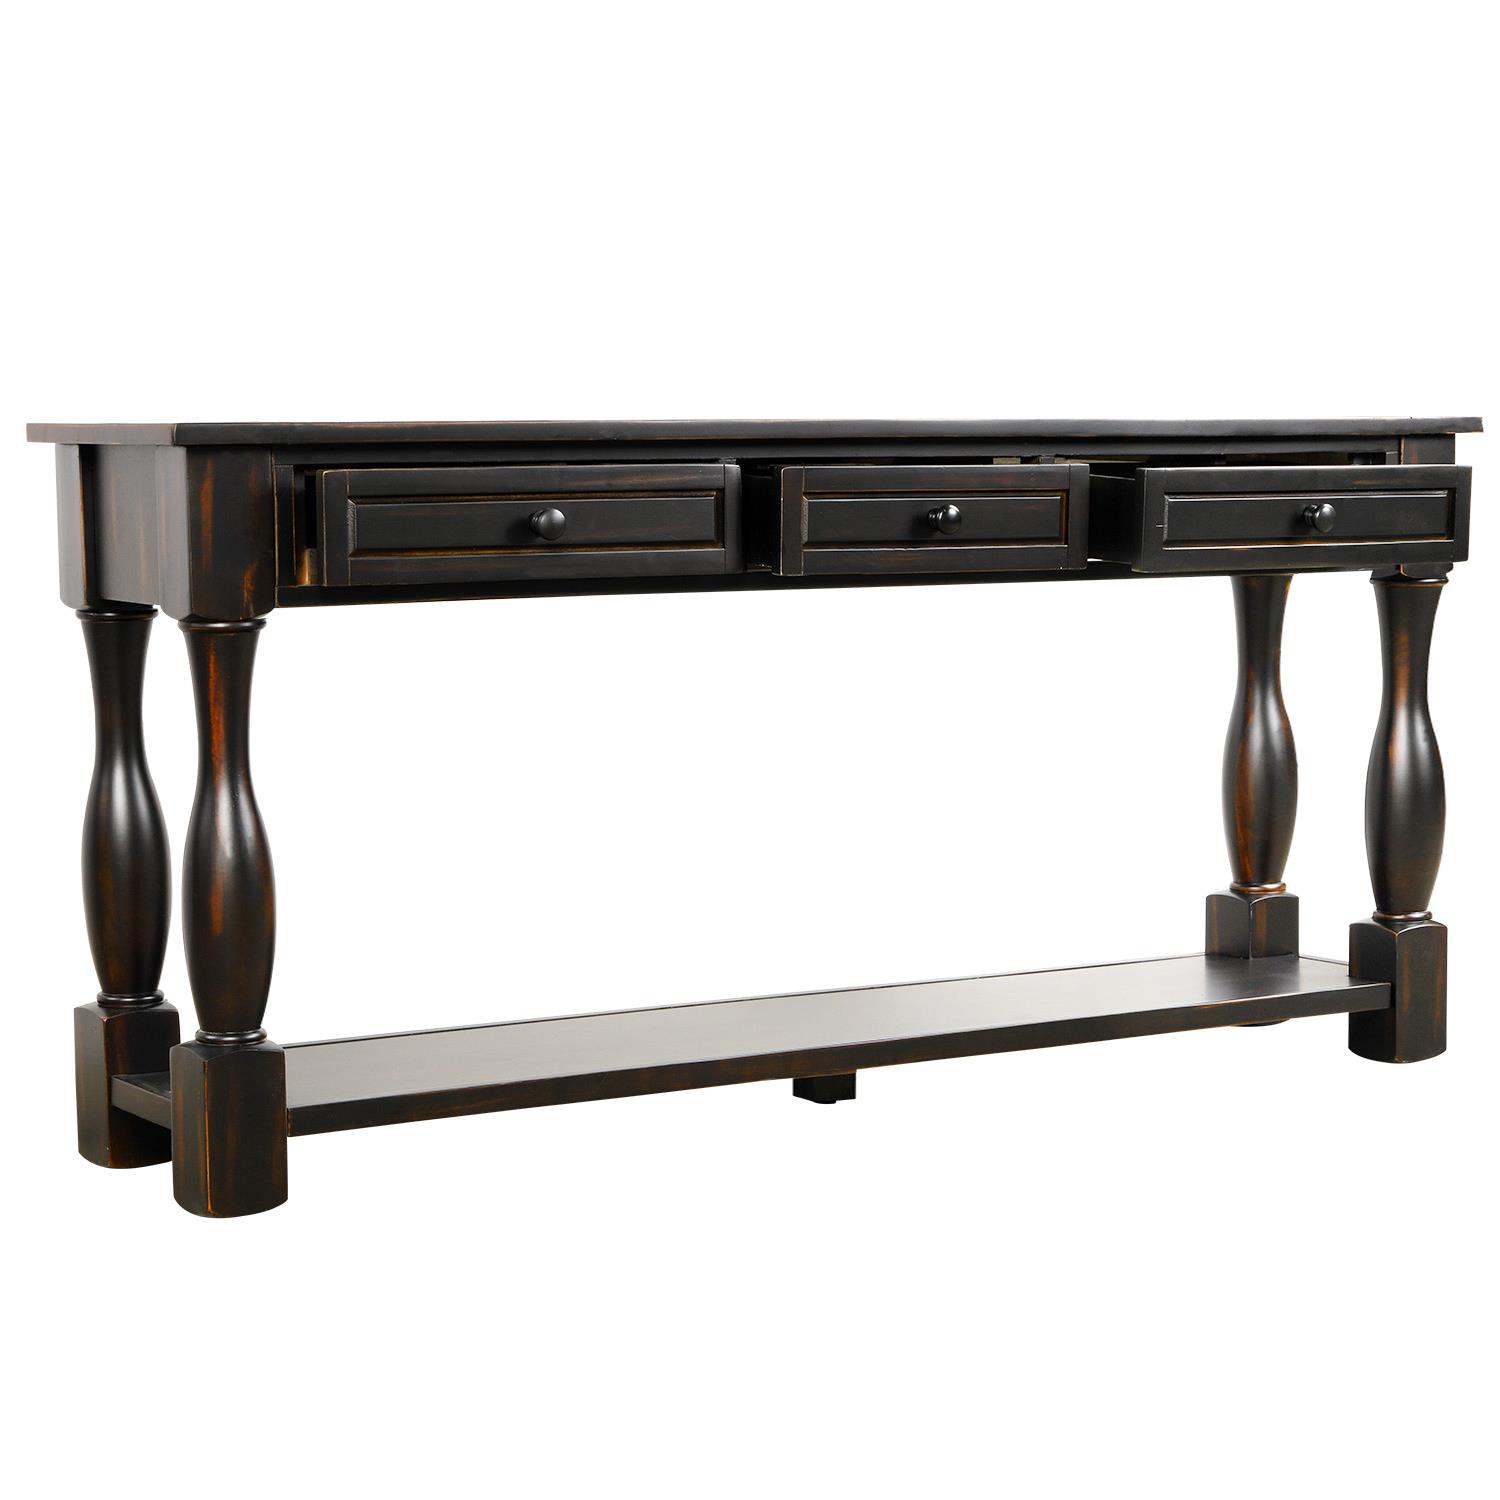 Zimtown Contemporary Console Table Sofa Table Side Desk with 3 Storage Drawers and Low Shelf - image 5 of 9